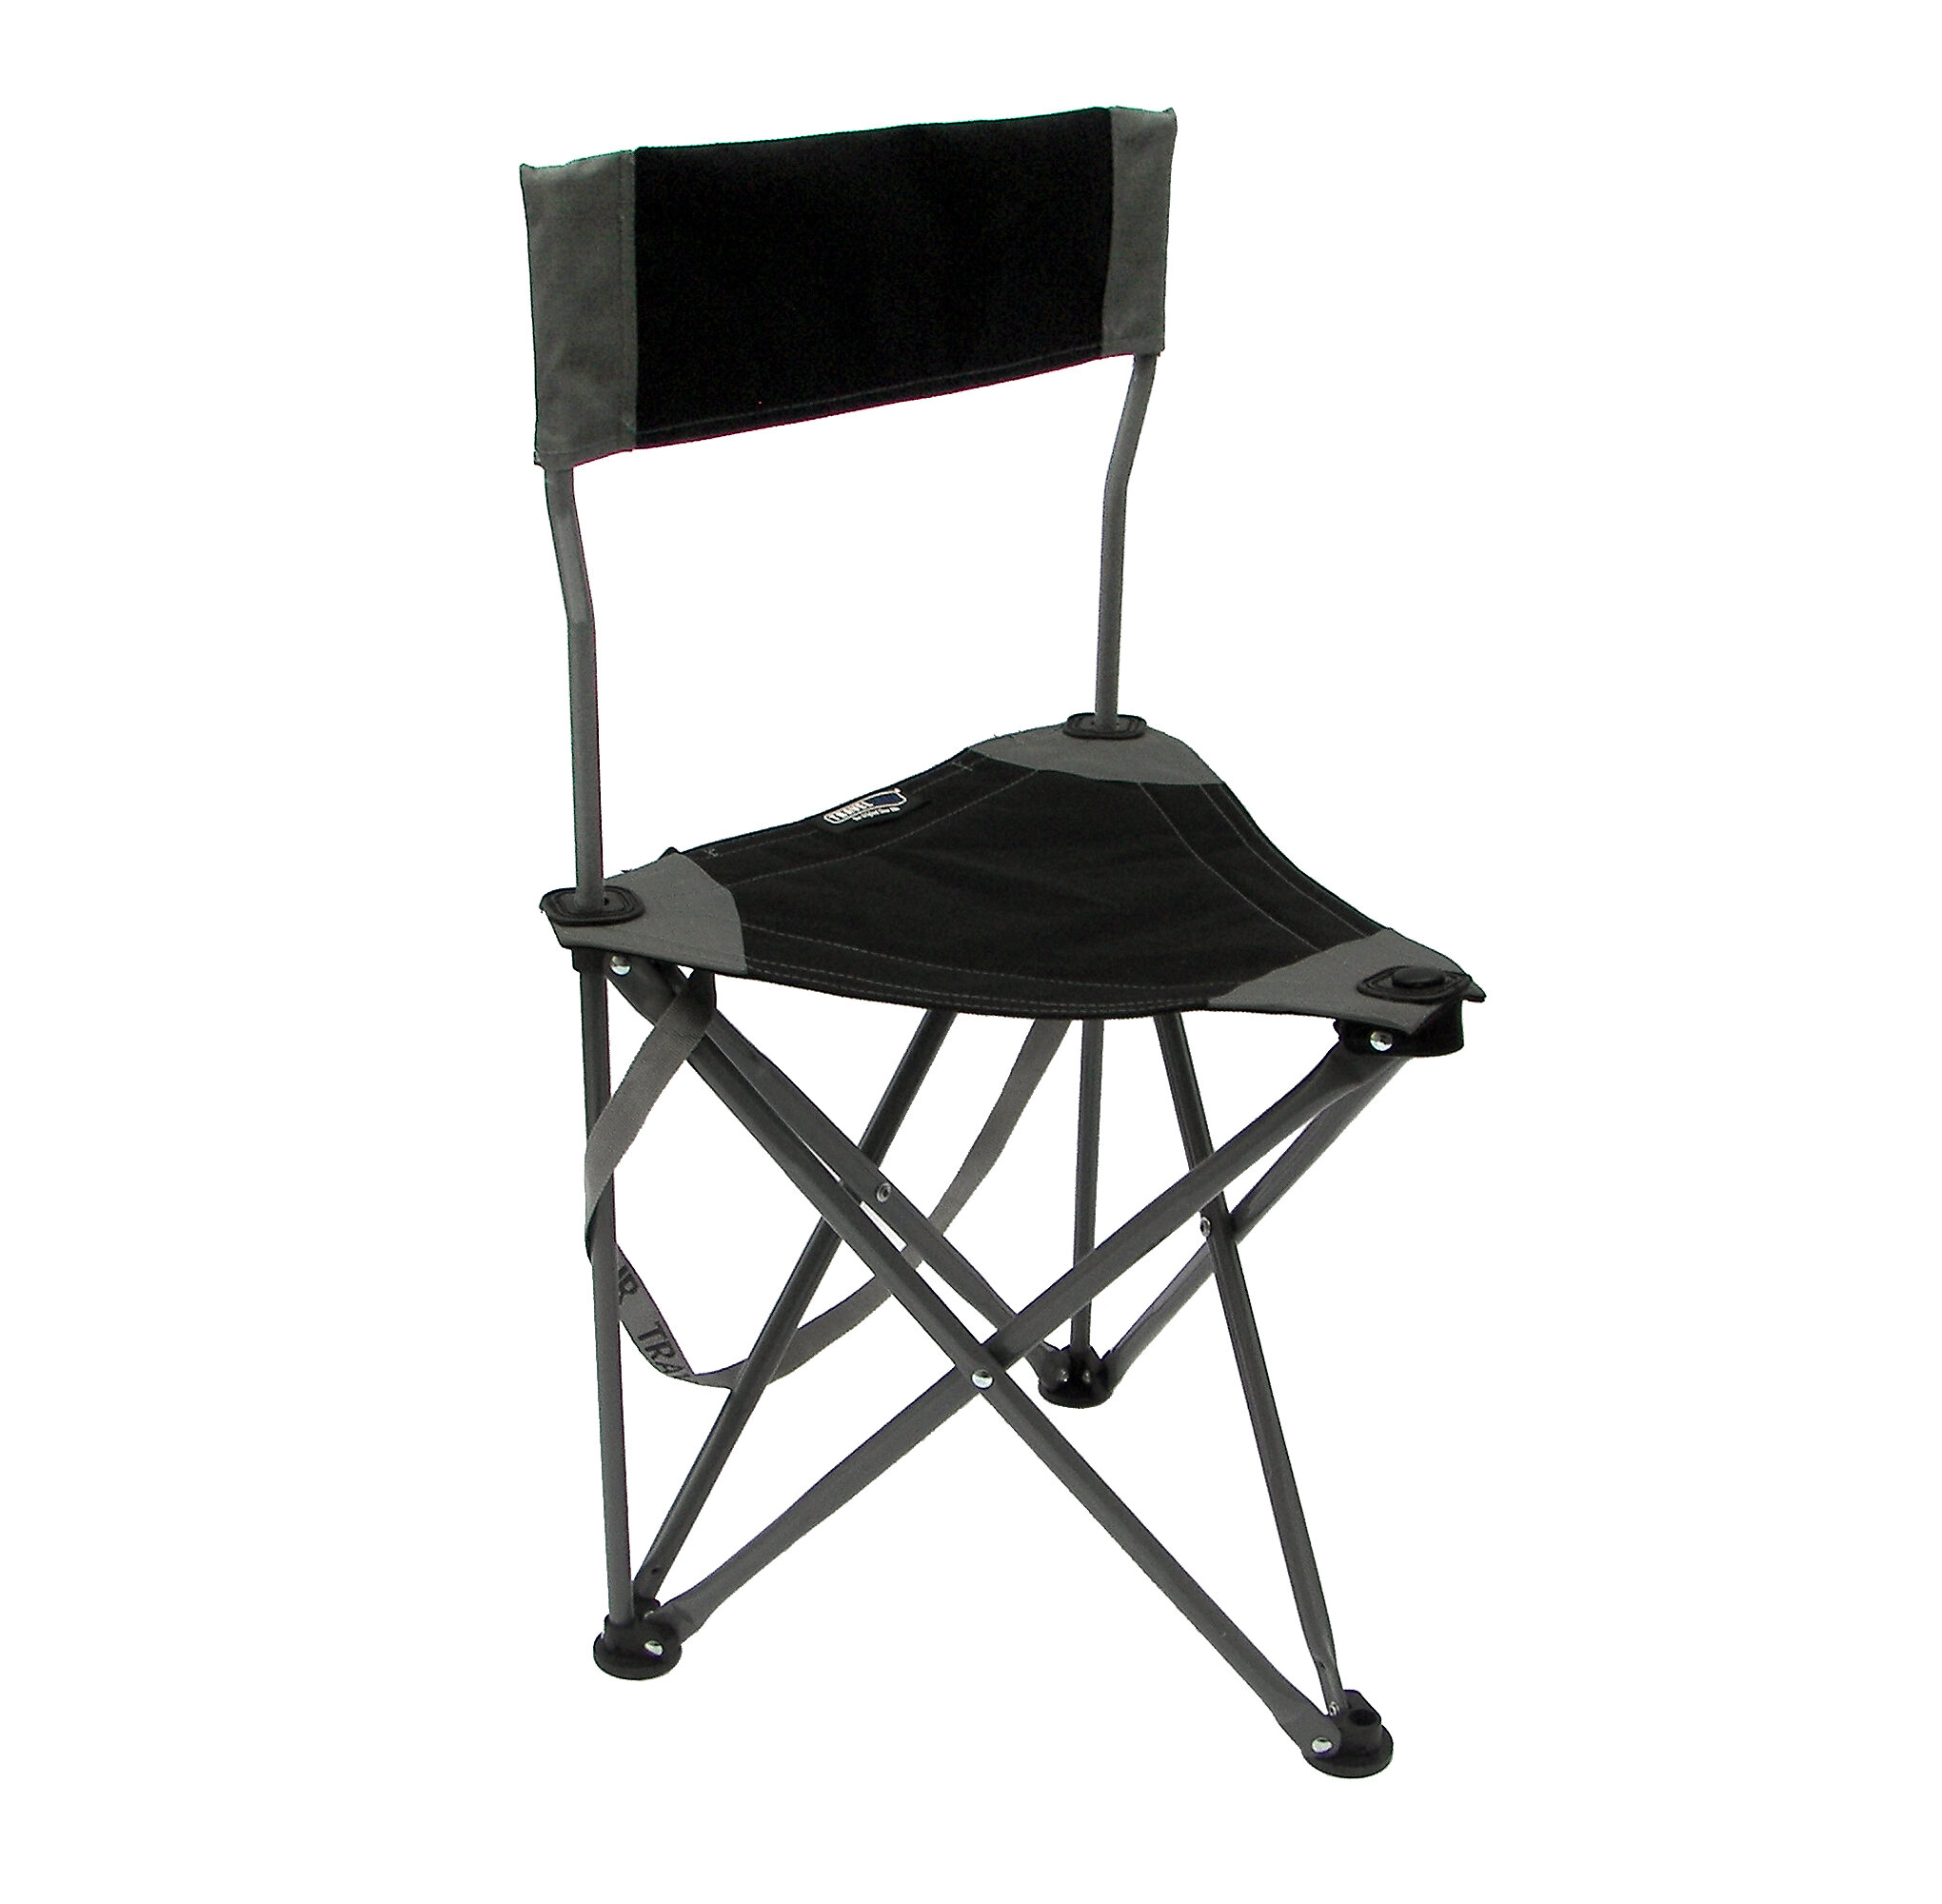 Travel Chair Folding Camping Chair & Reviews